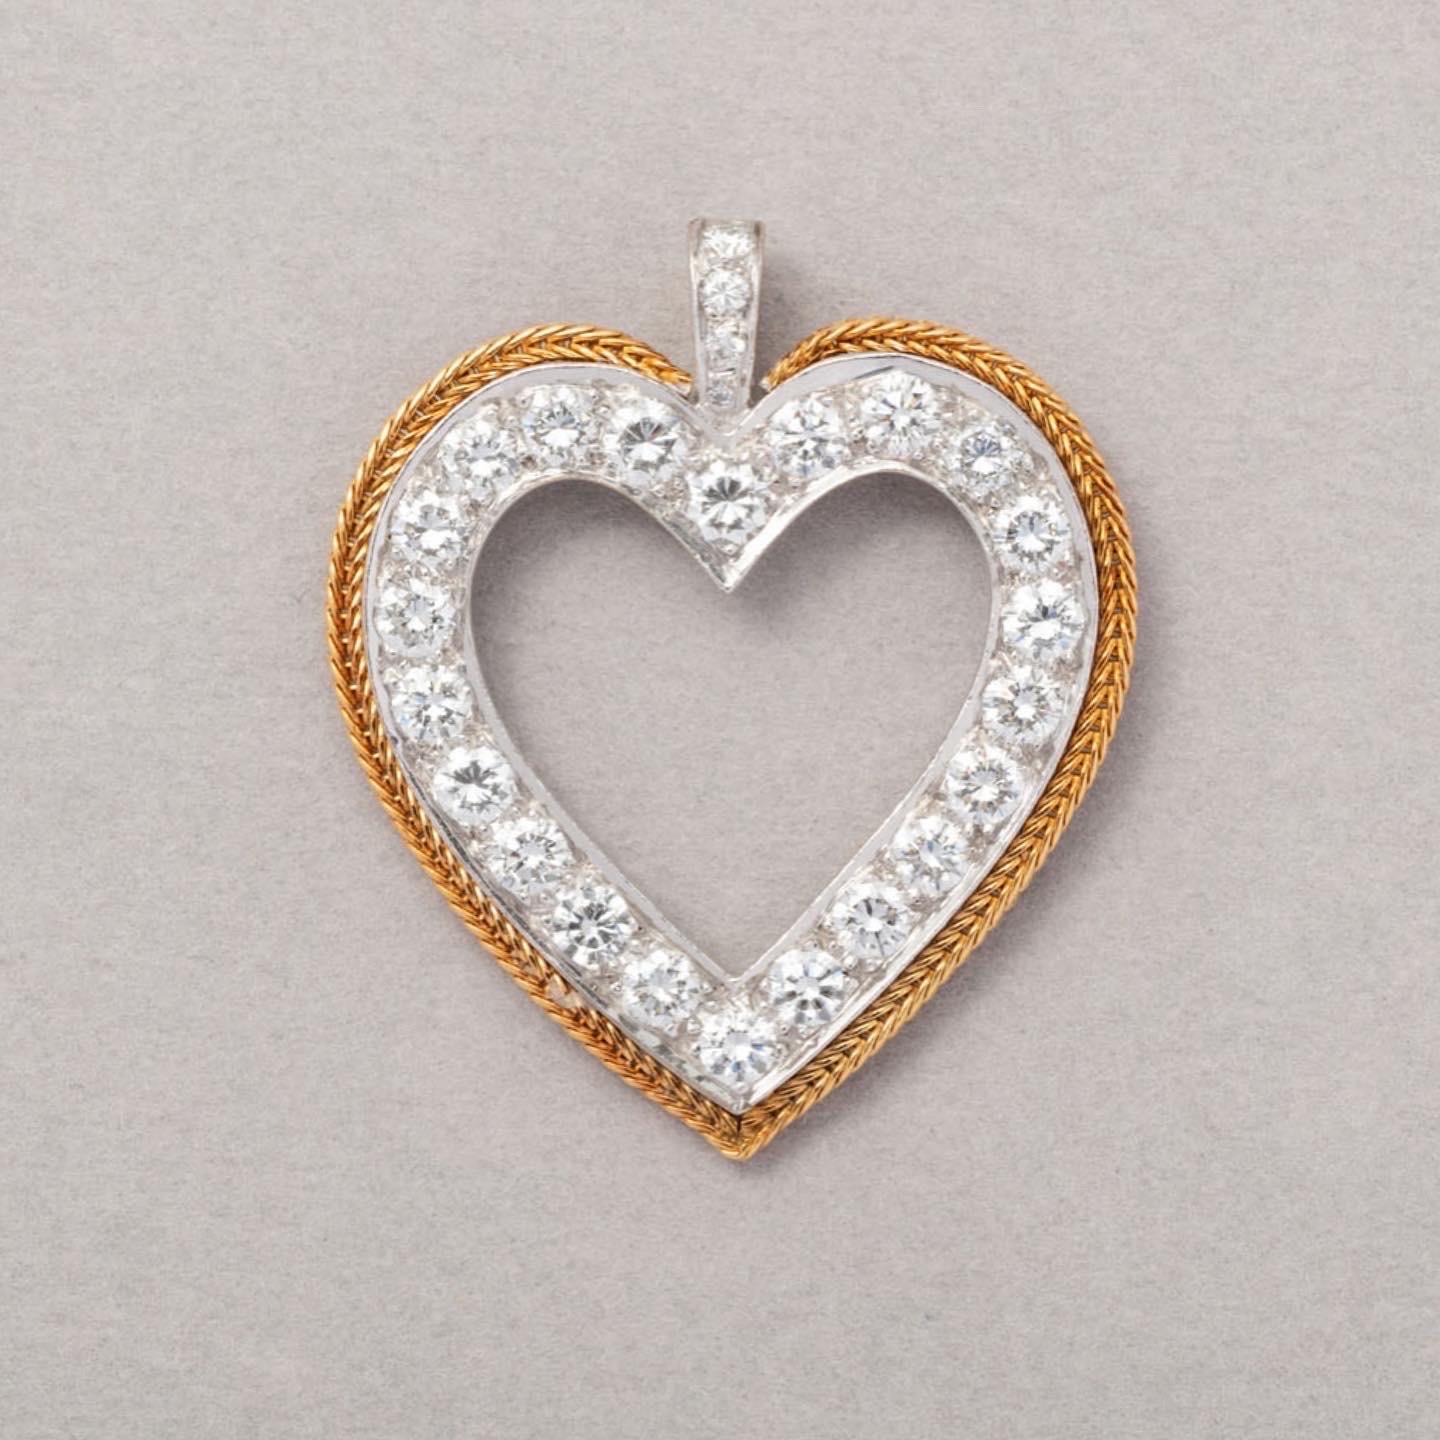 An 18 carat gold heart shaped pendant witn open white gold heart set with brilliant cut diamonds contoured by a yellow gold woven gold outline (circa total 2.2 ct.), with French assay marks for 18 carat gold, circa 1970, possibly English in